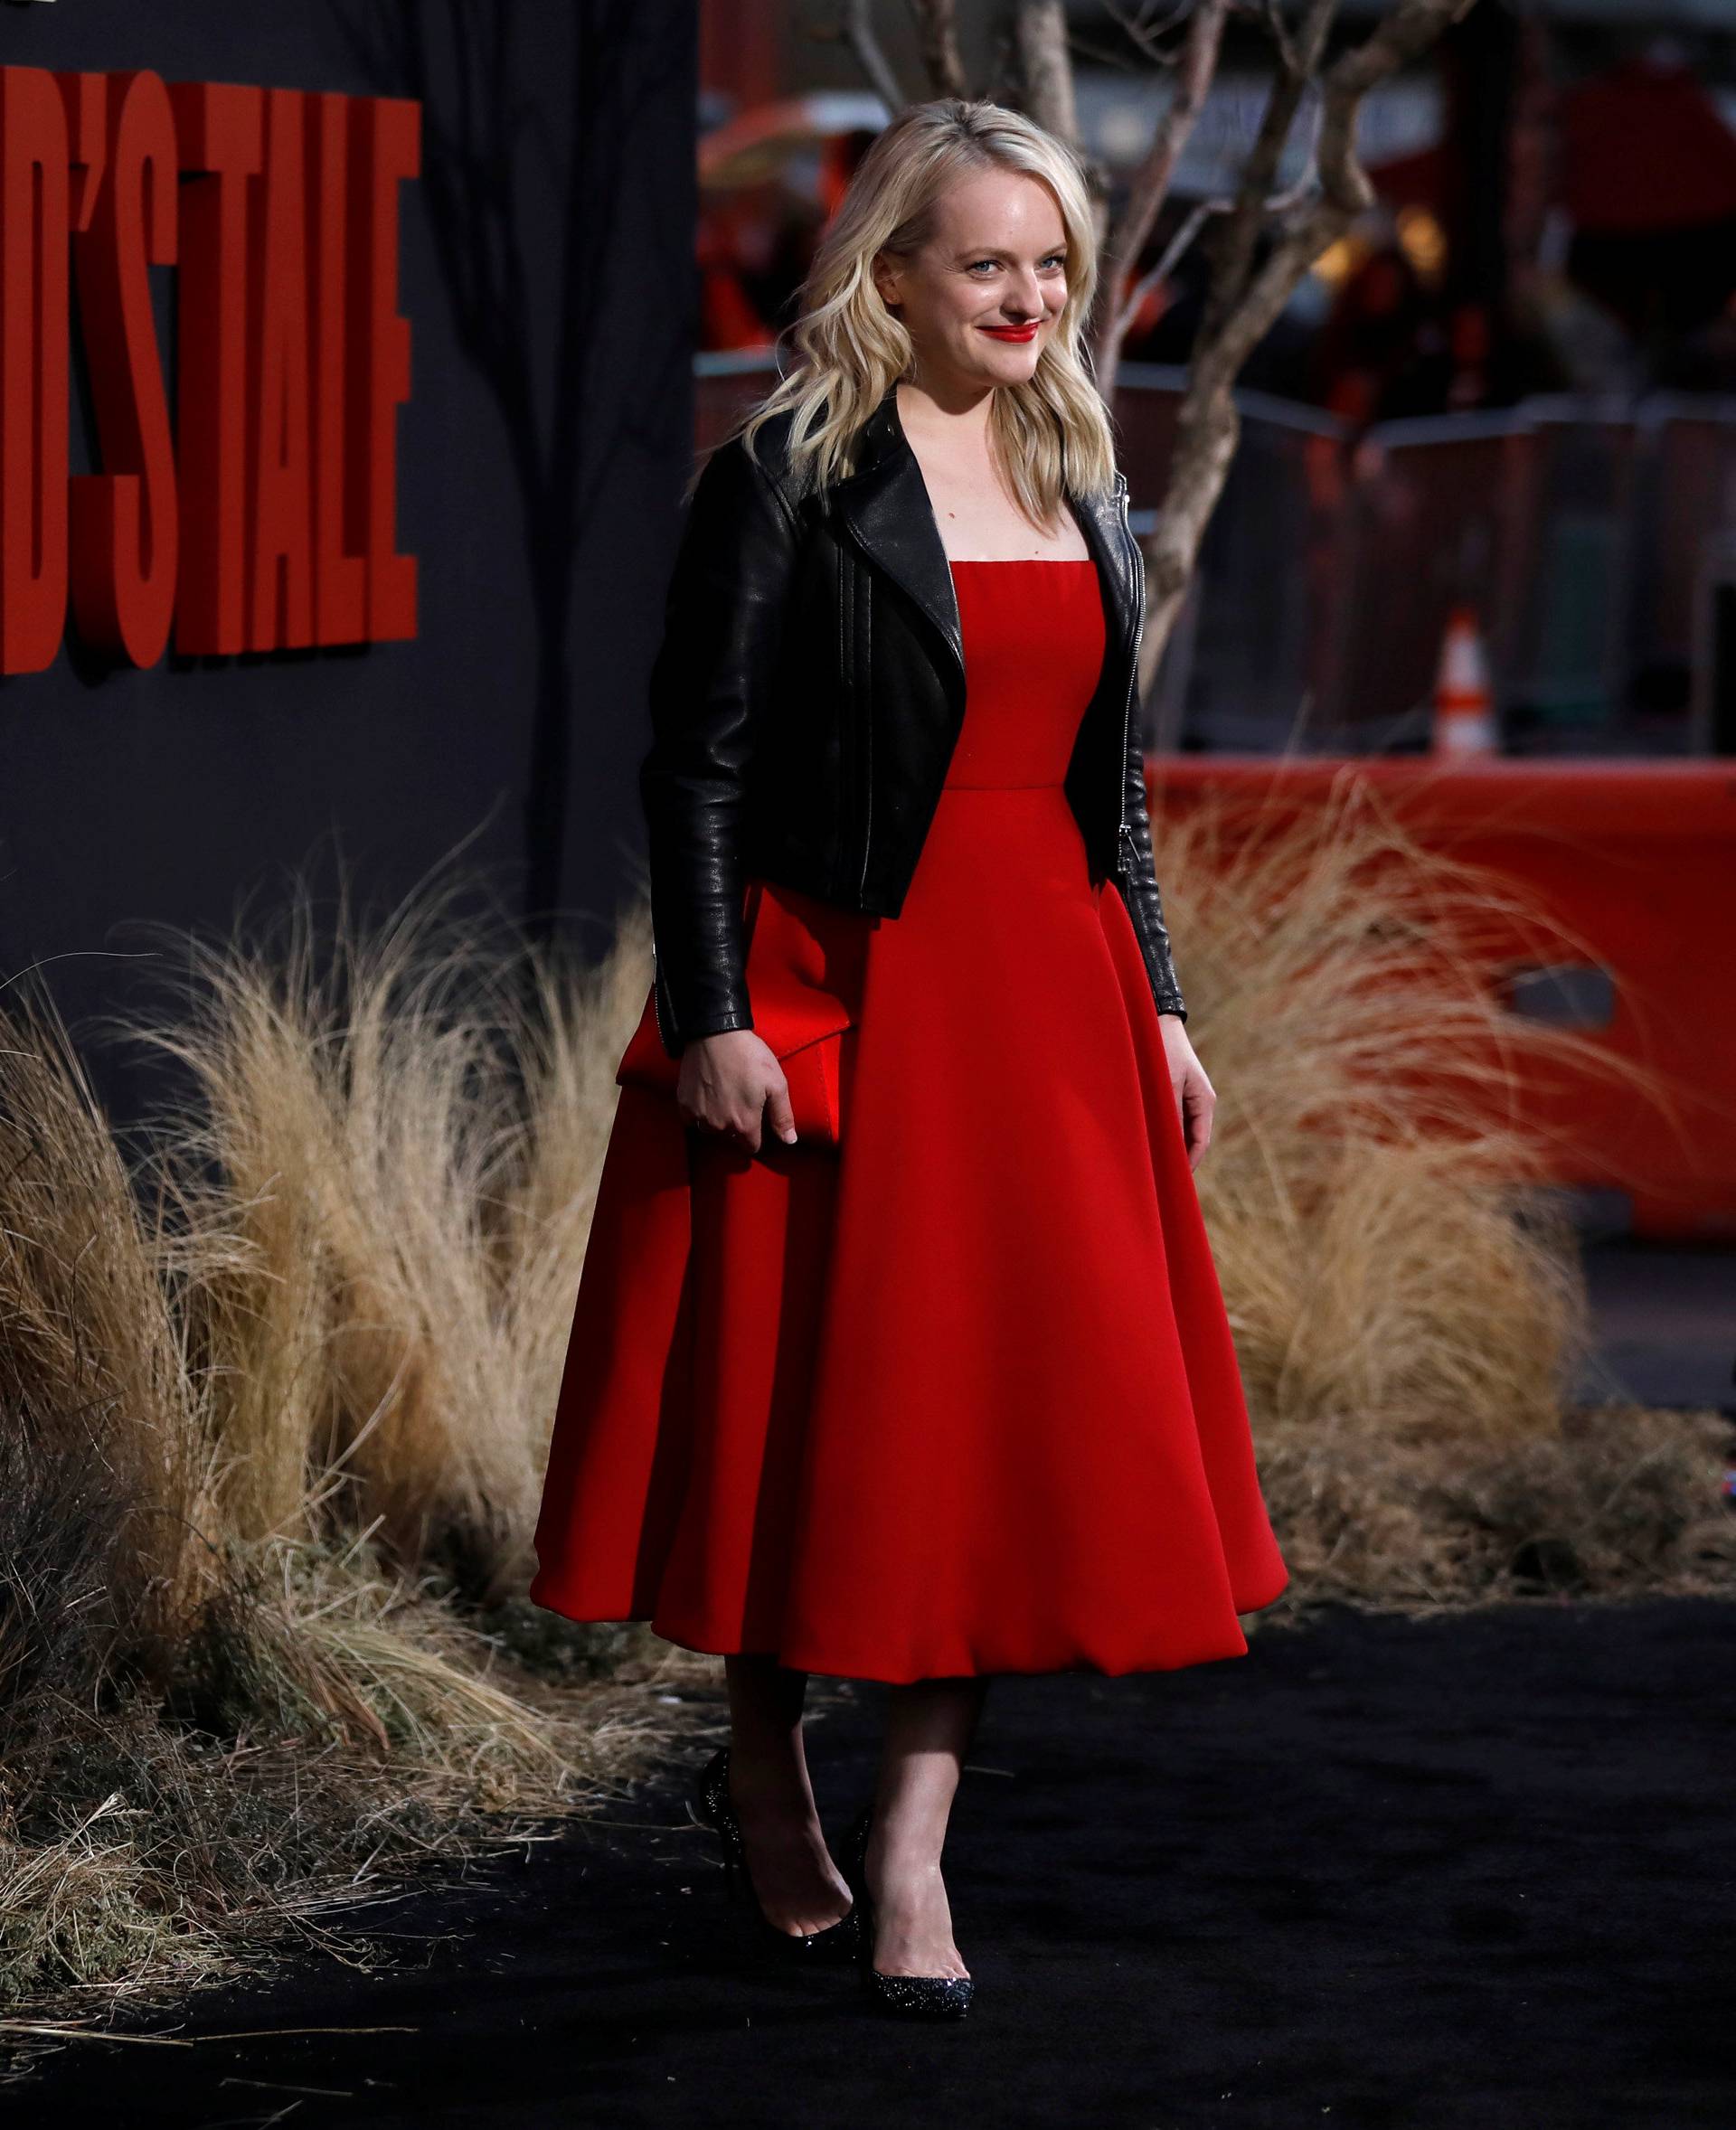 Cast member Moss poses at the premiere for the second season of the television series "The Handmaid's Tale" in Los Angeles